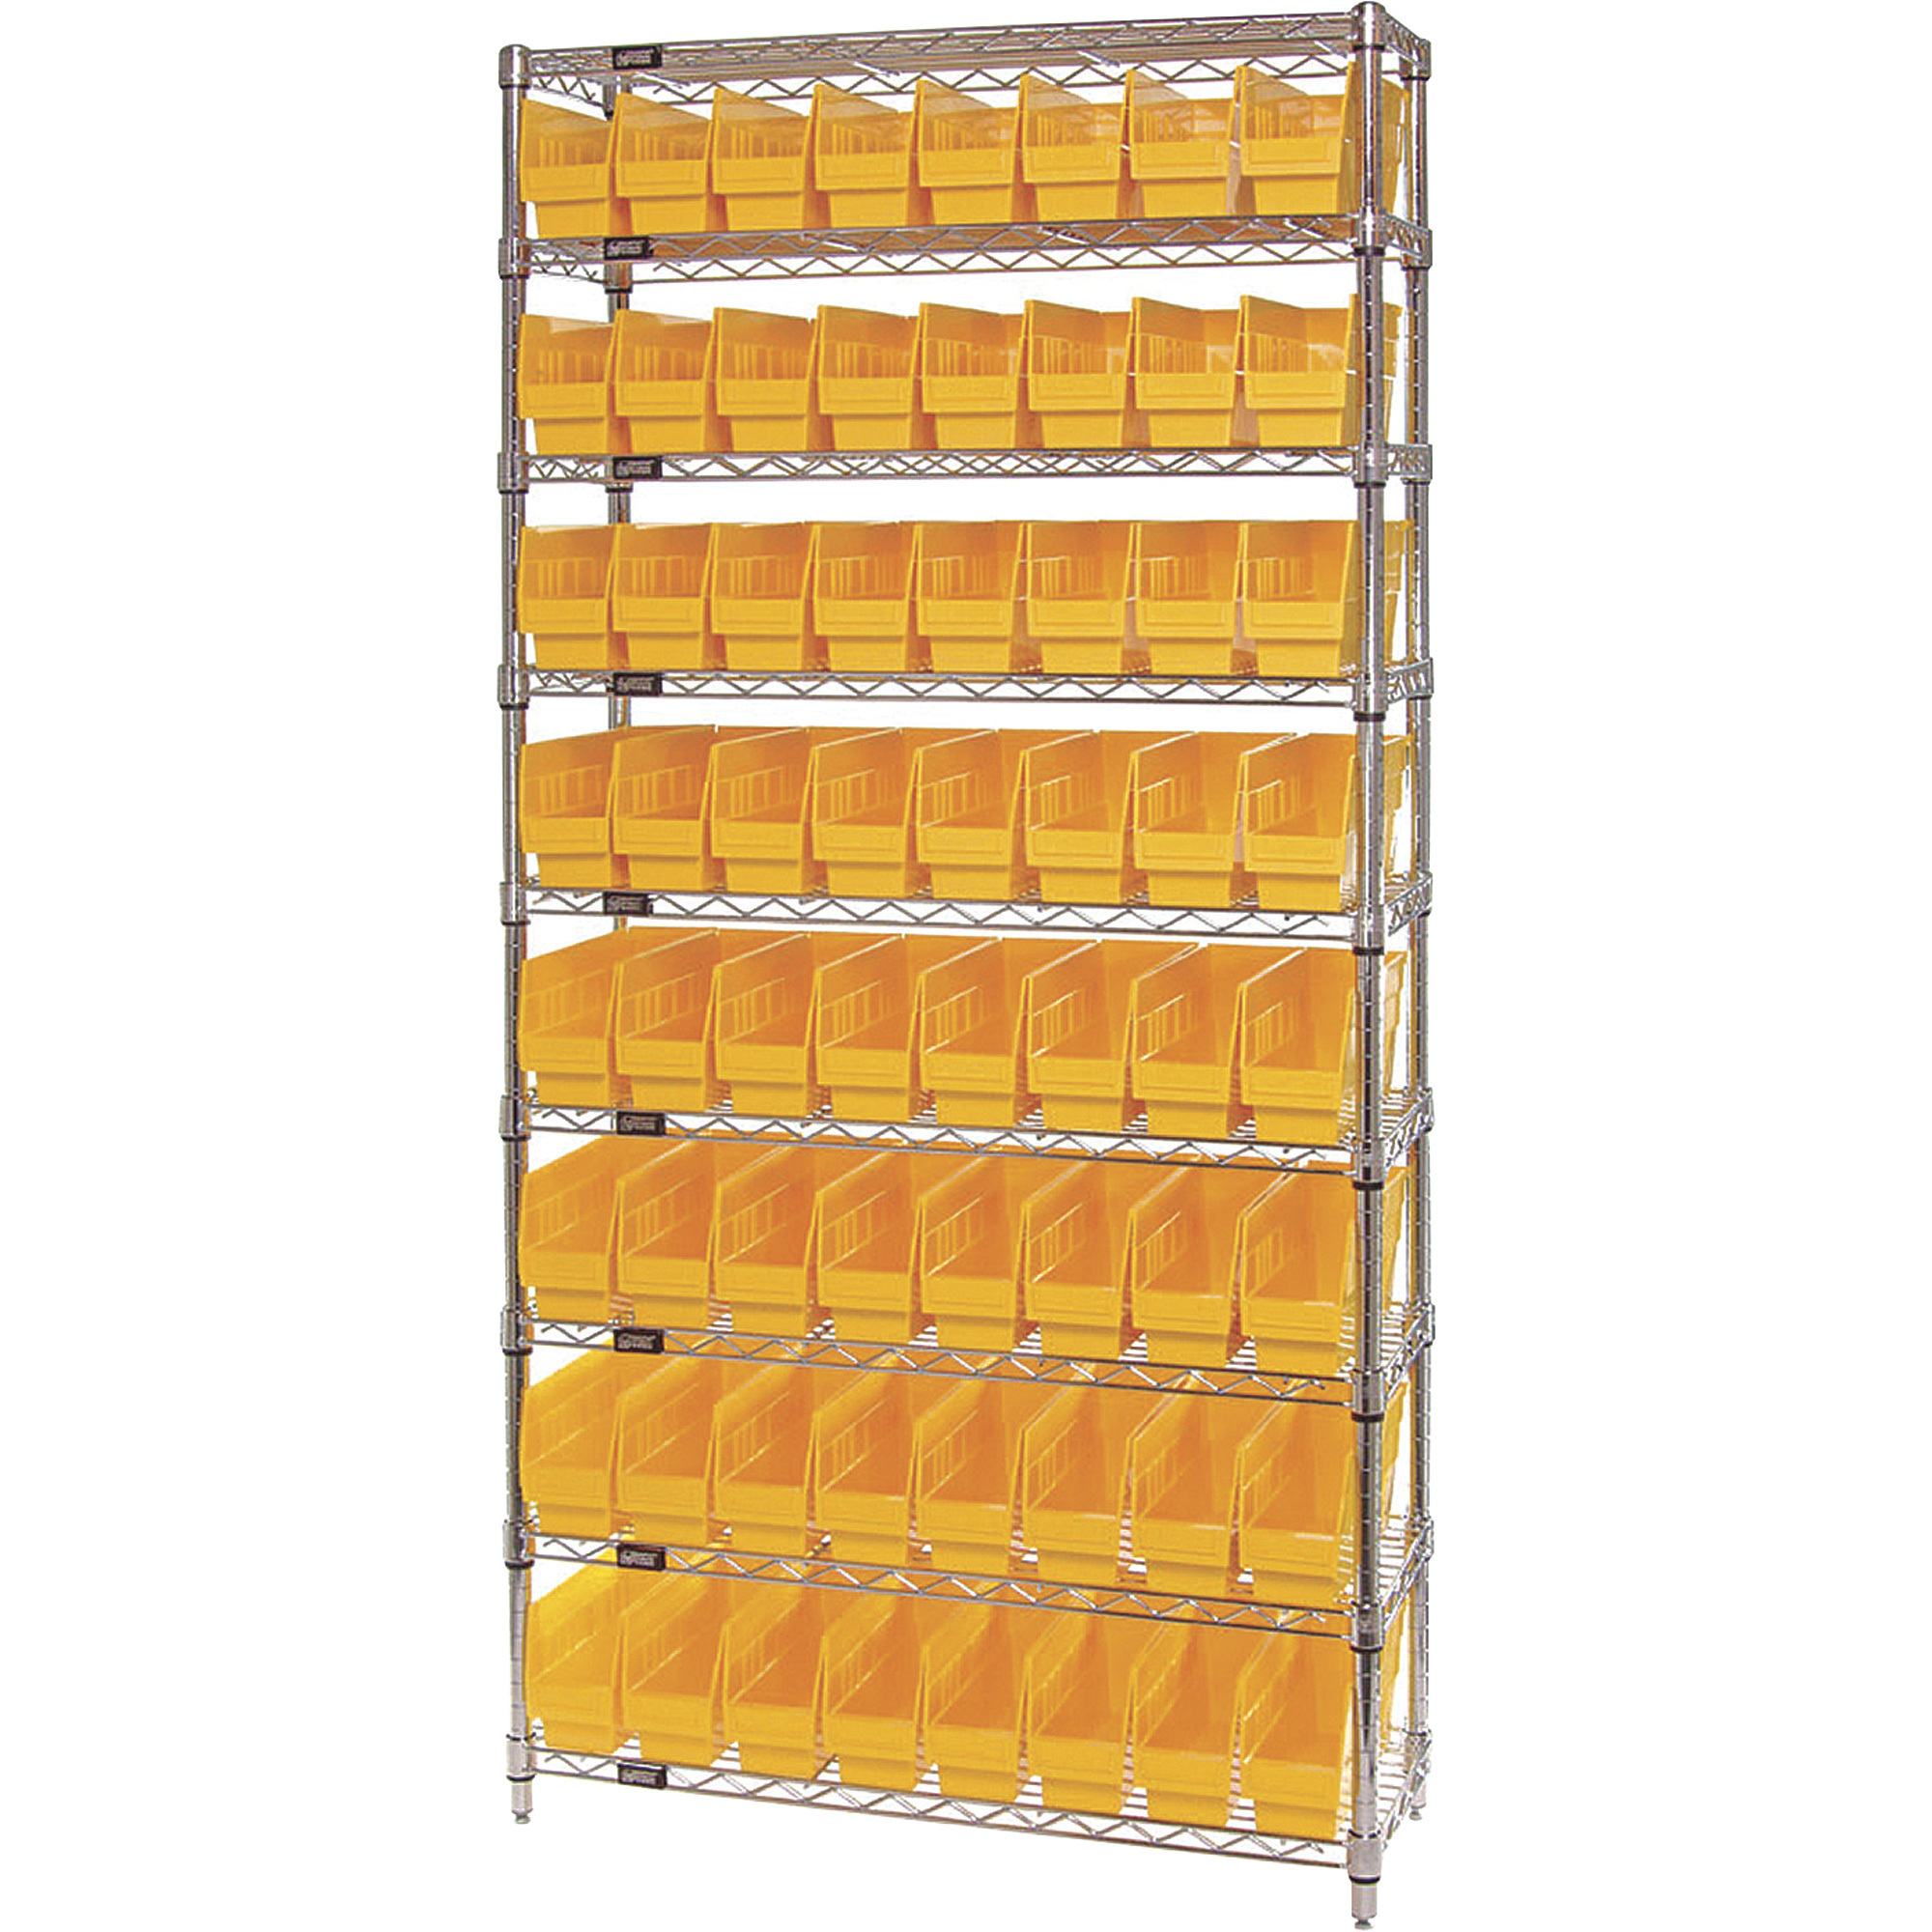 Quantum Storage Single Side Wire Chrome Shelving Unit with 64 Bins — 36Inch W x 12Inch D x 74Inch H, Yellow, Model WR9-201YL -  Quantum Storage Systems